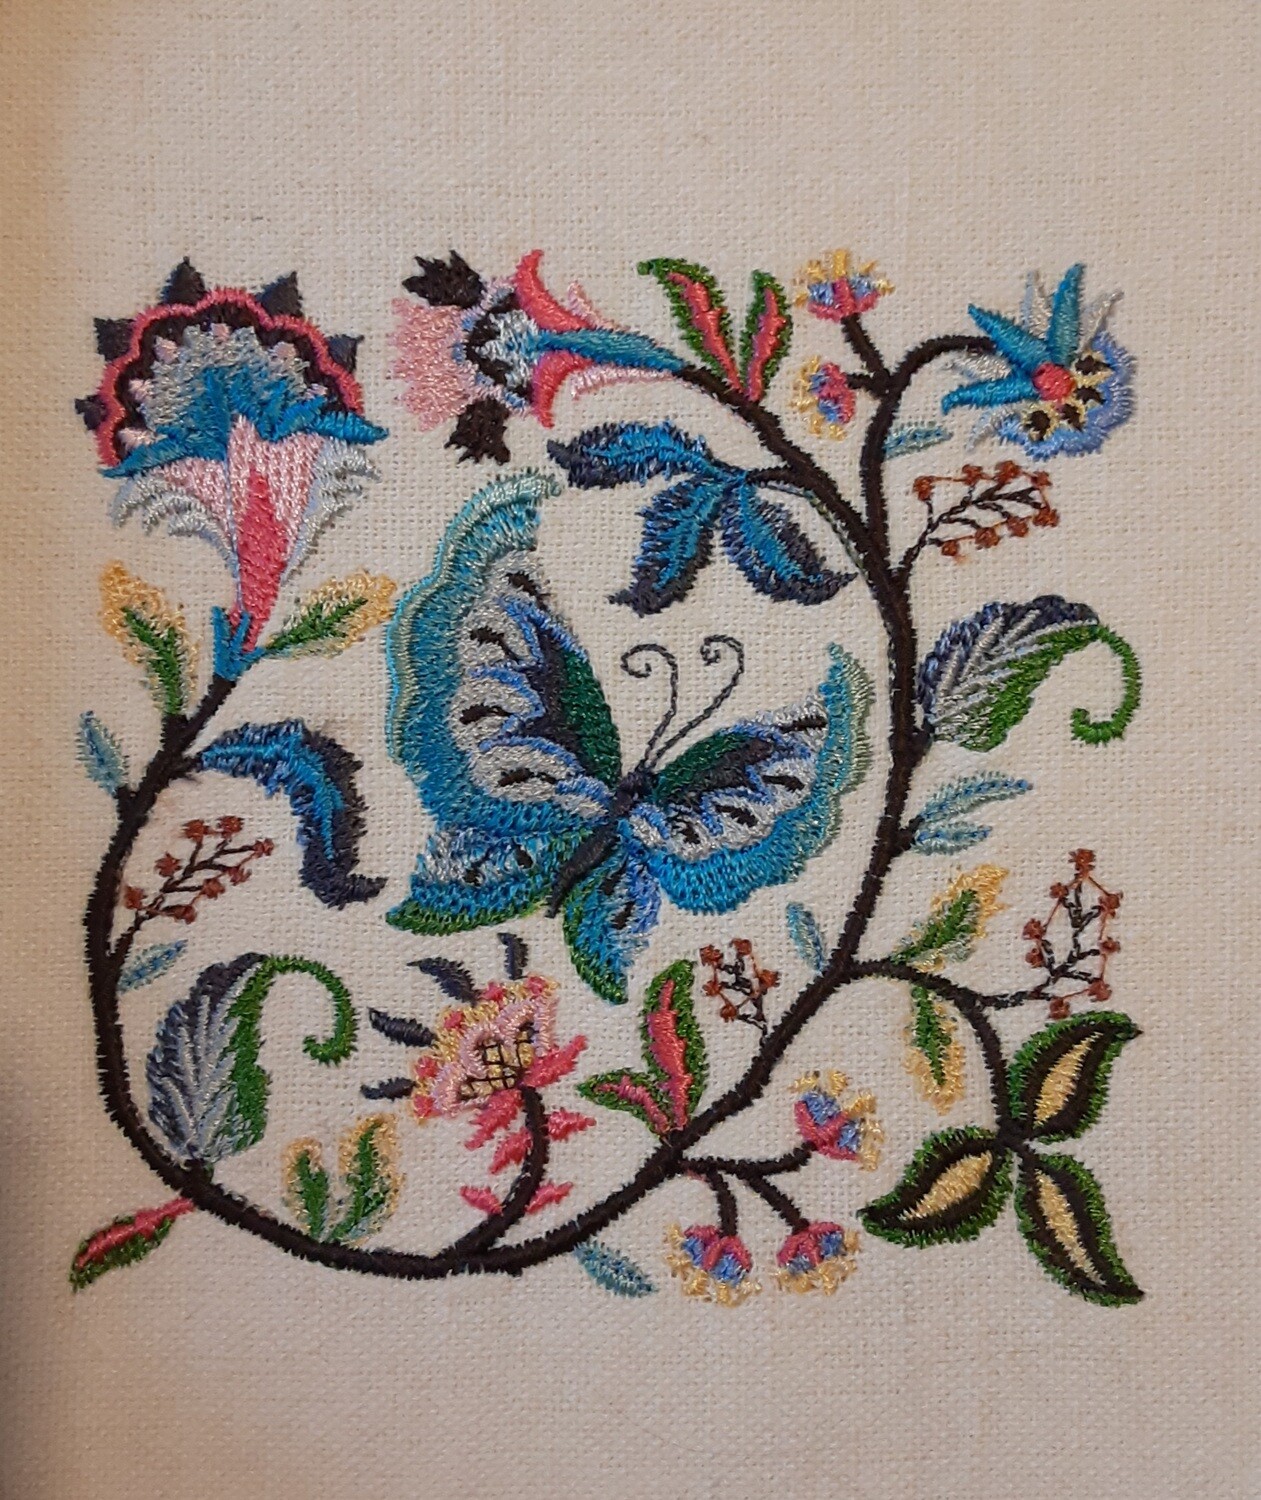 Butterflies and Dragonflies Embroideries - click to see more